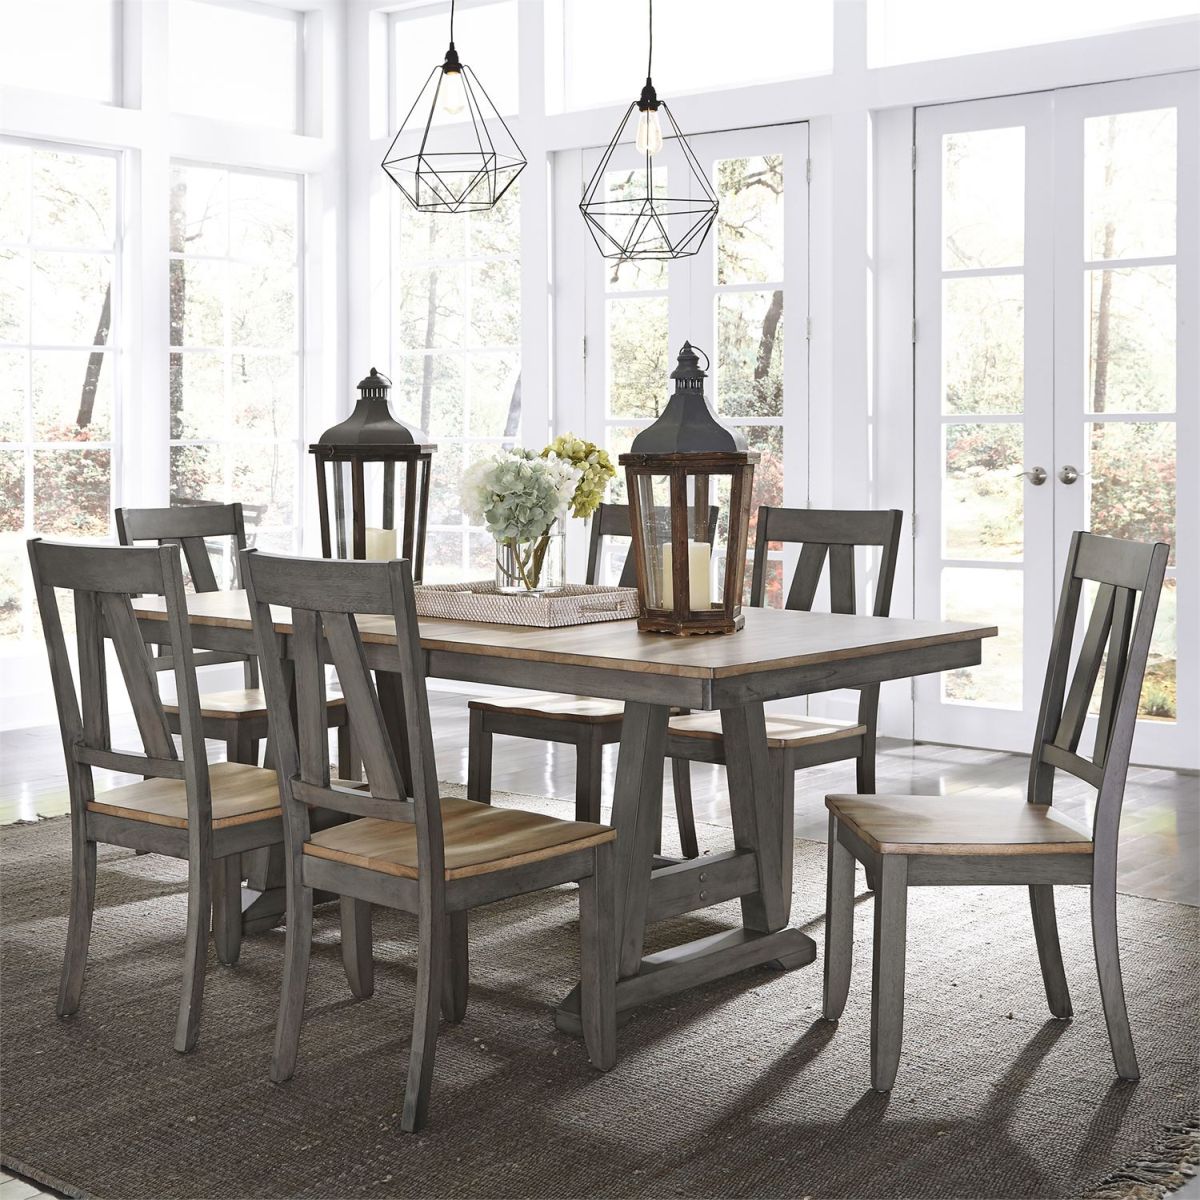 Liberty Furniture Lindsey Farm Gray and Sandstone 7 Piece Trestle Table Set